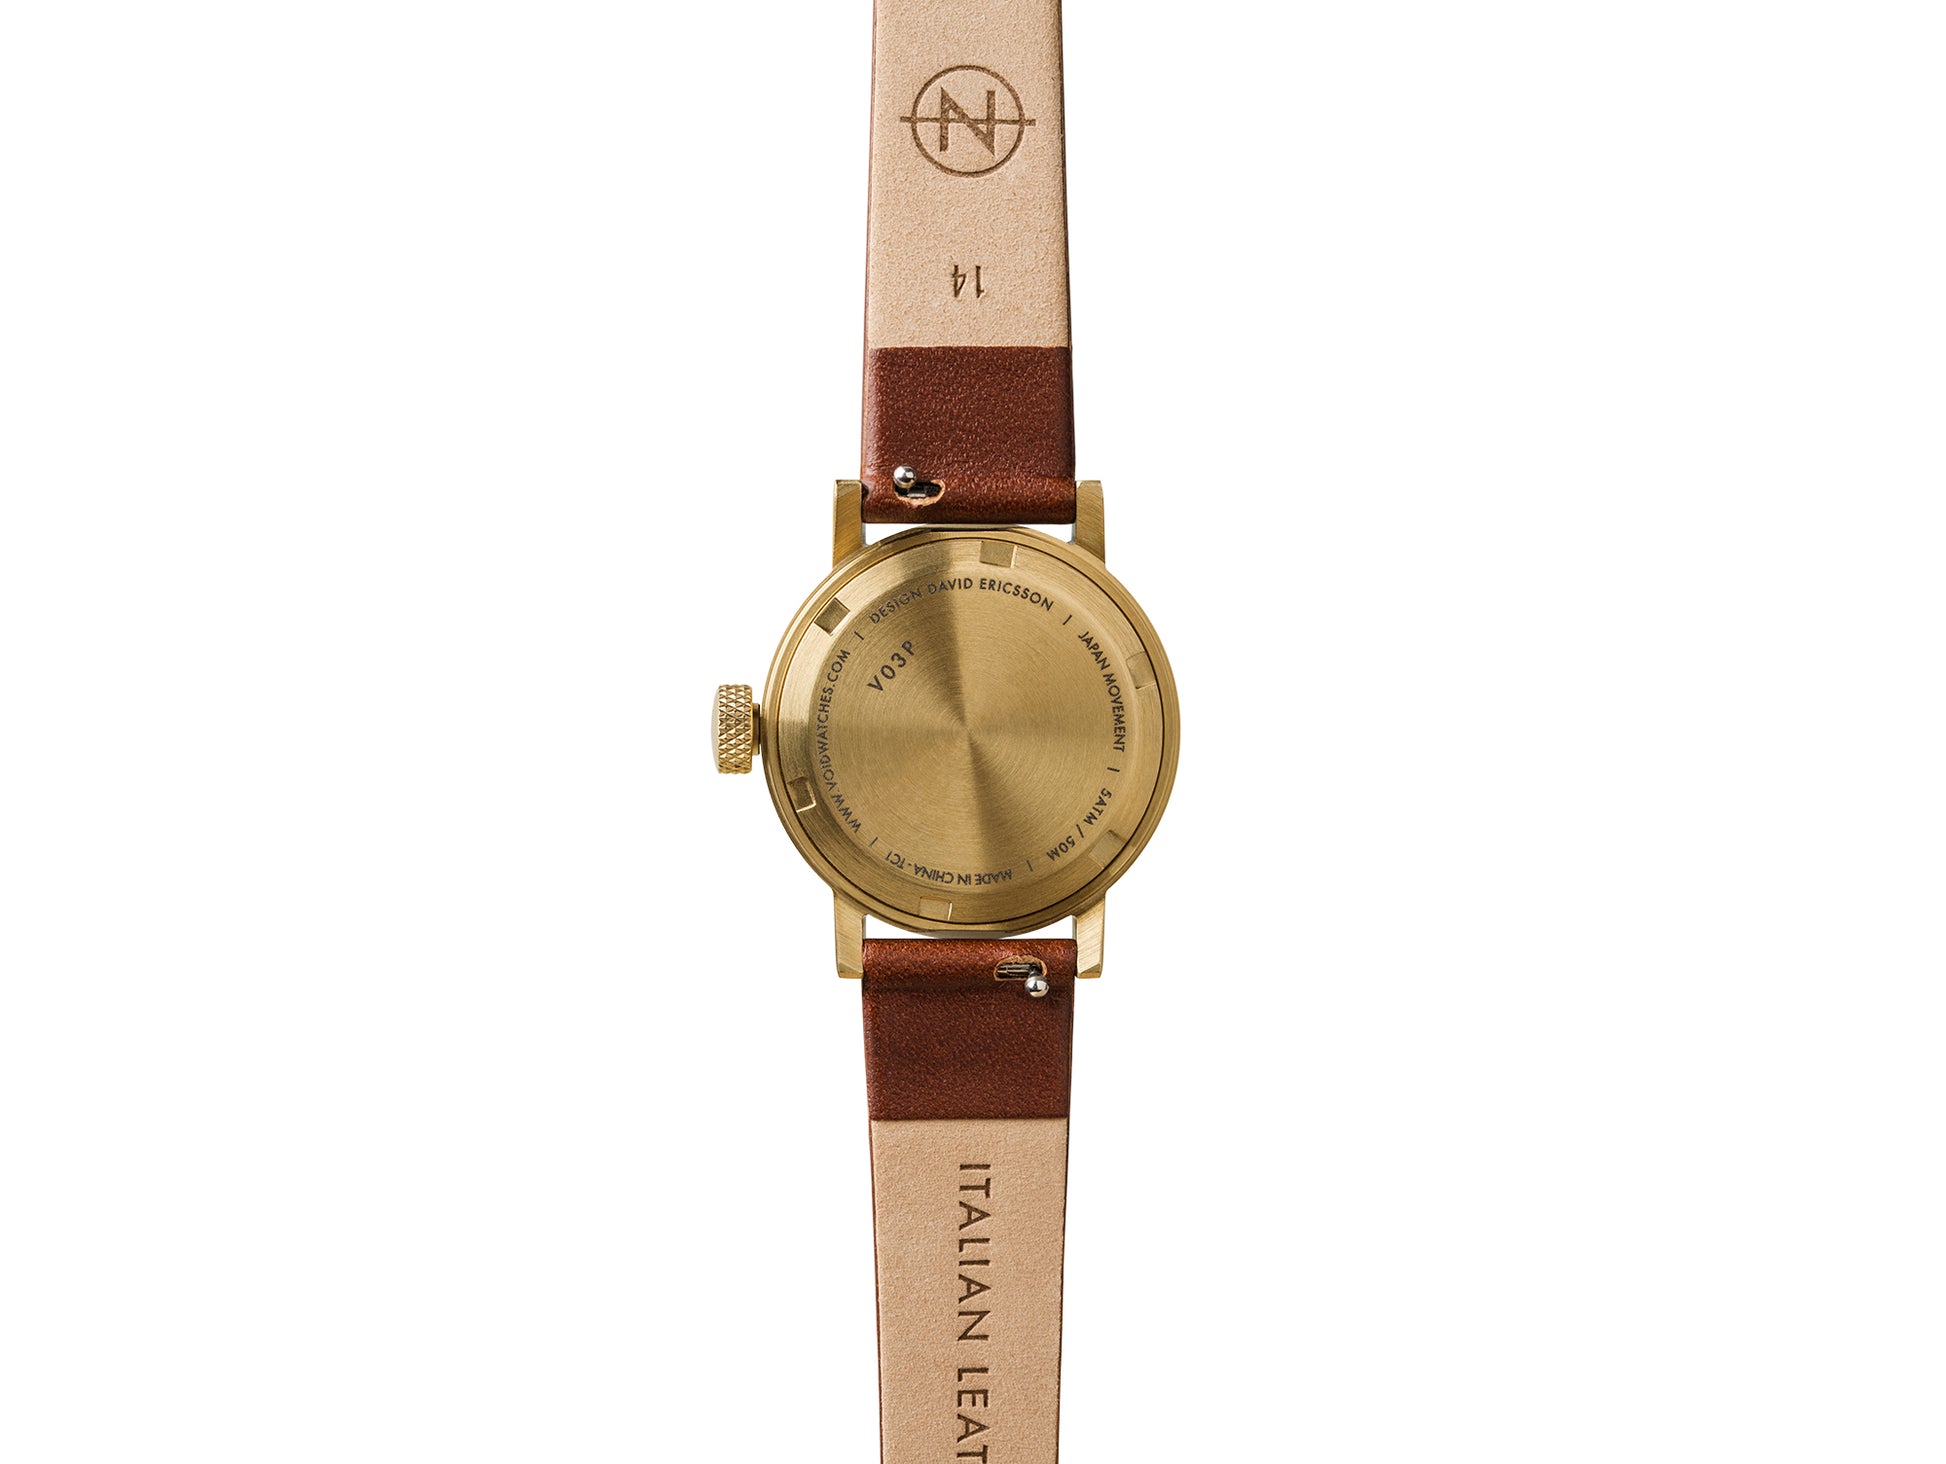 V03P Petite Gold and Brown by Void Watches